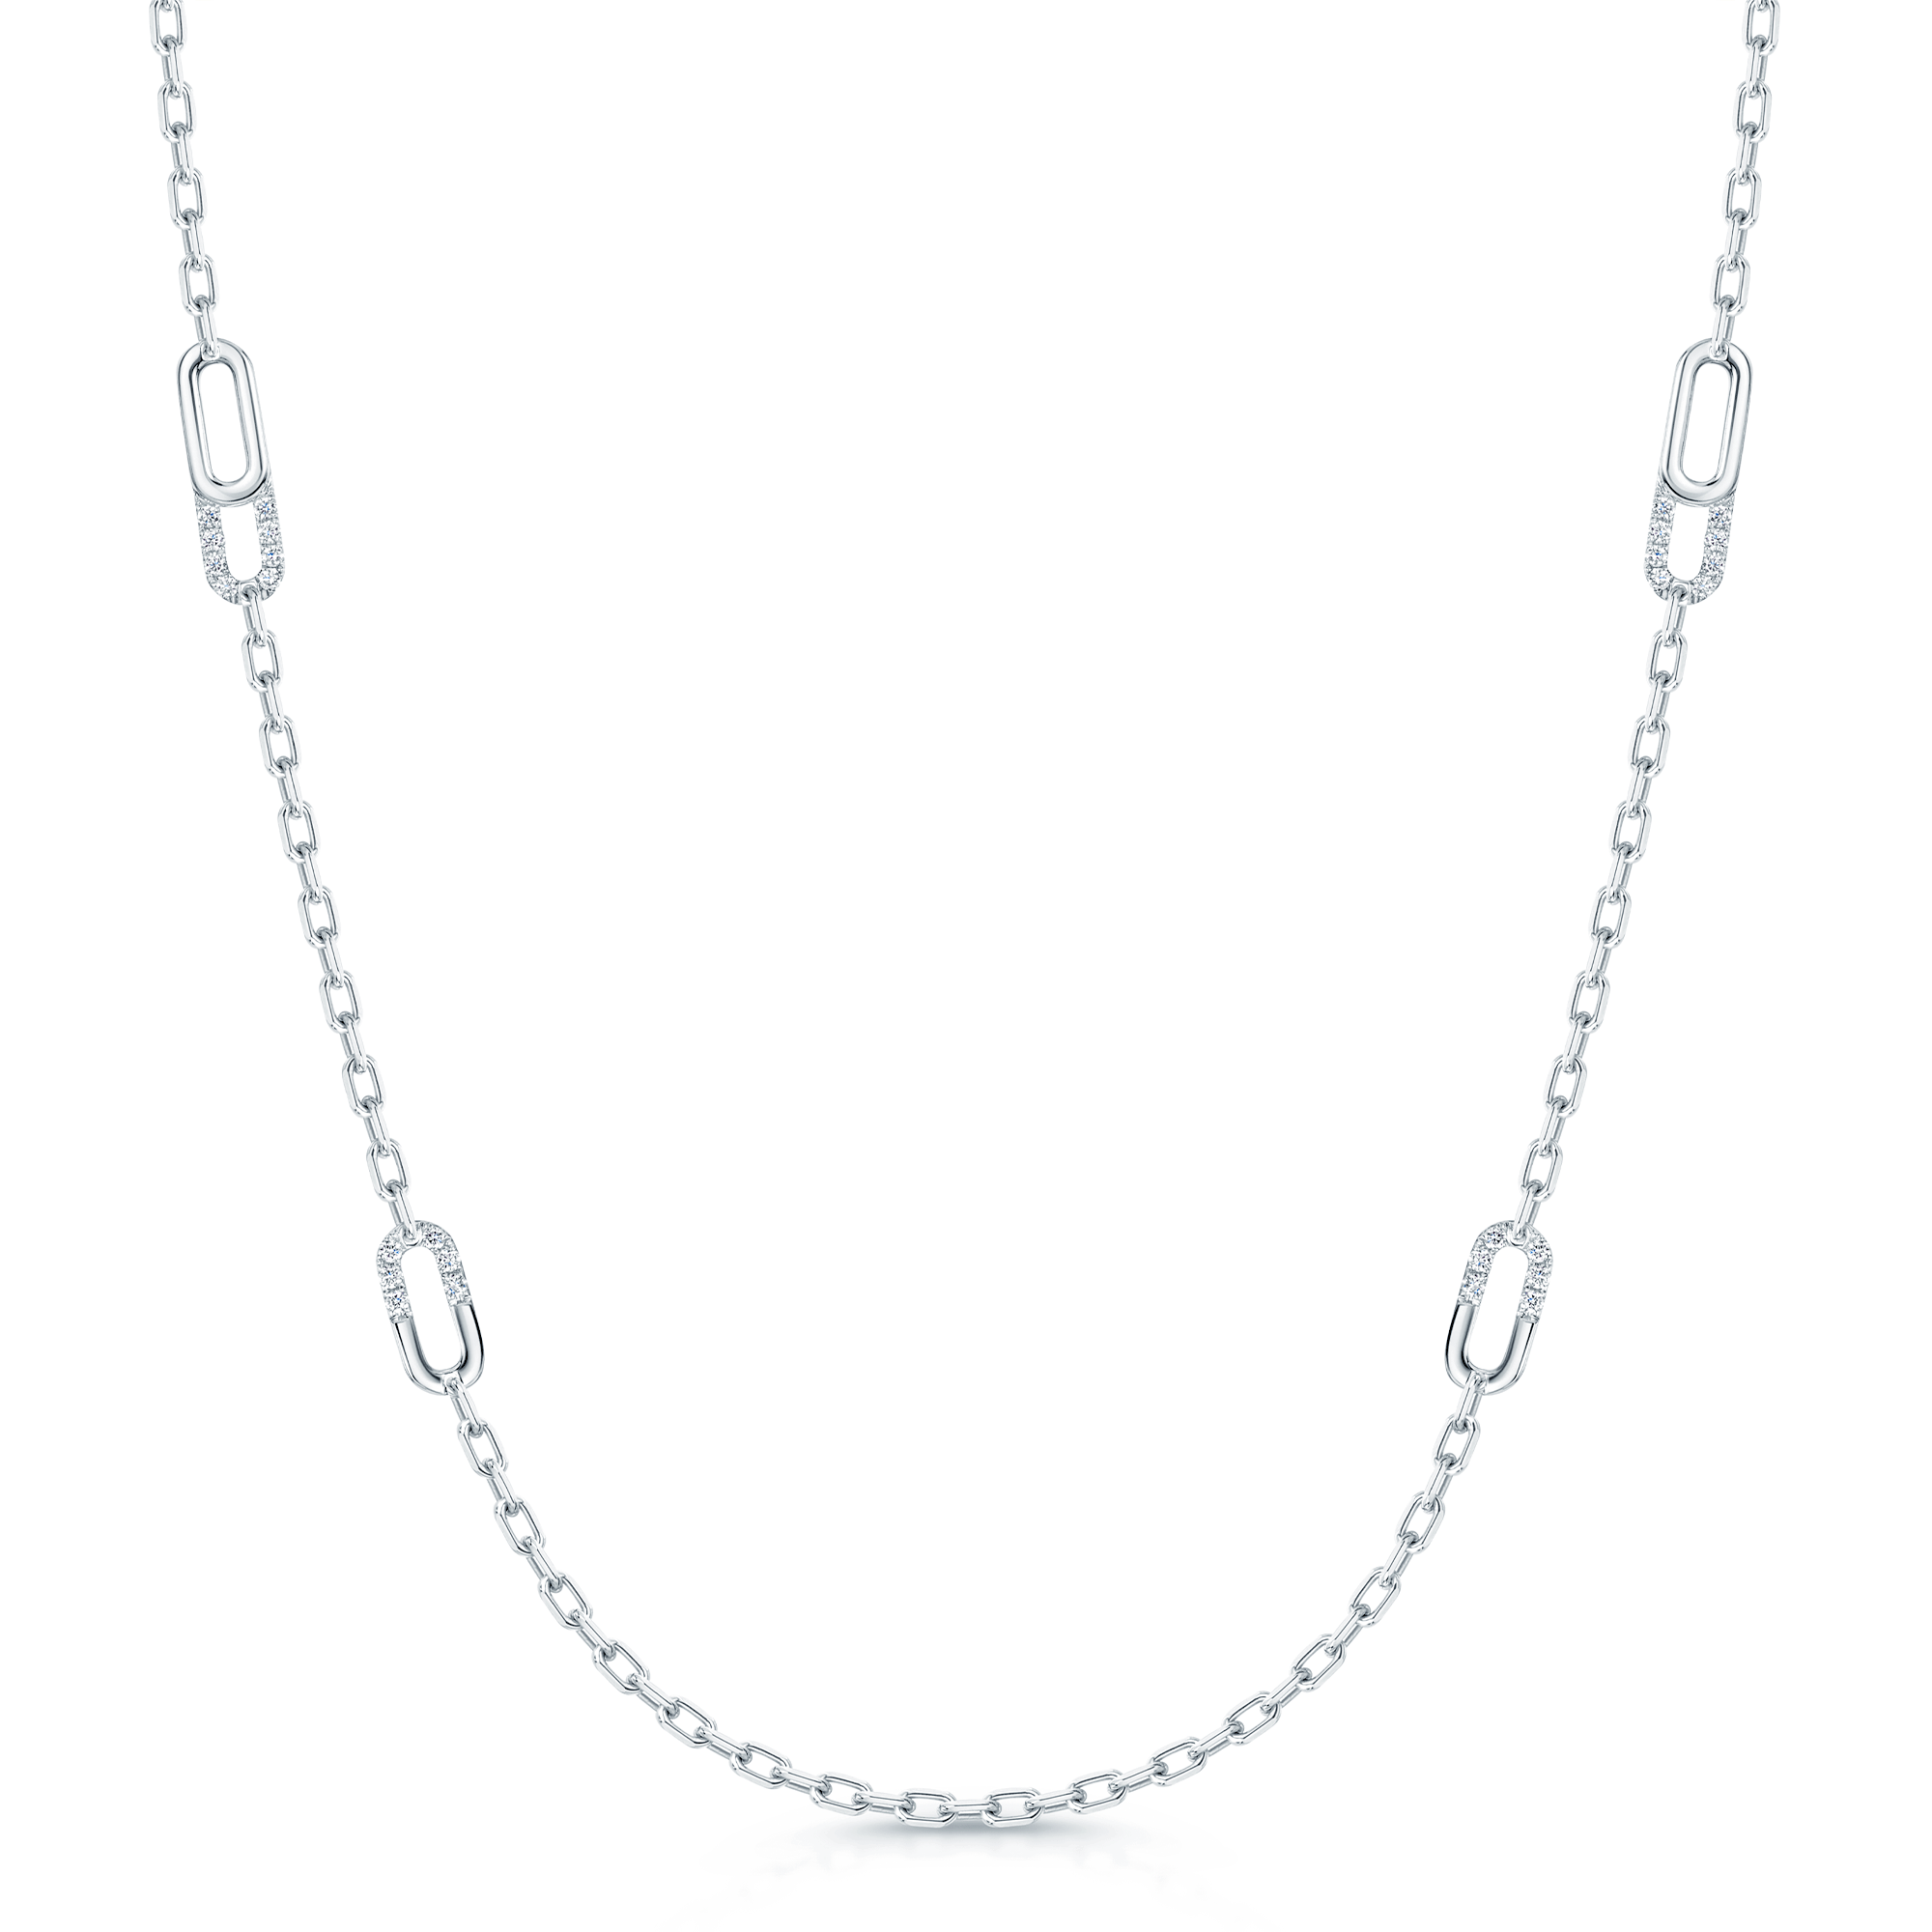 Verve Collection 18ct White Gold Diamond Loop Long Chain Necklace